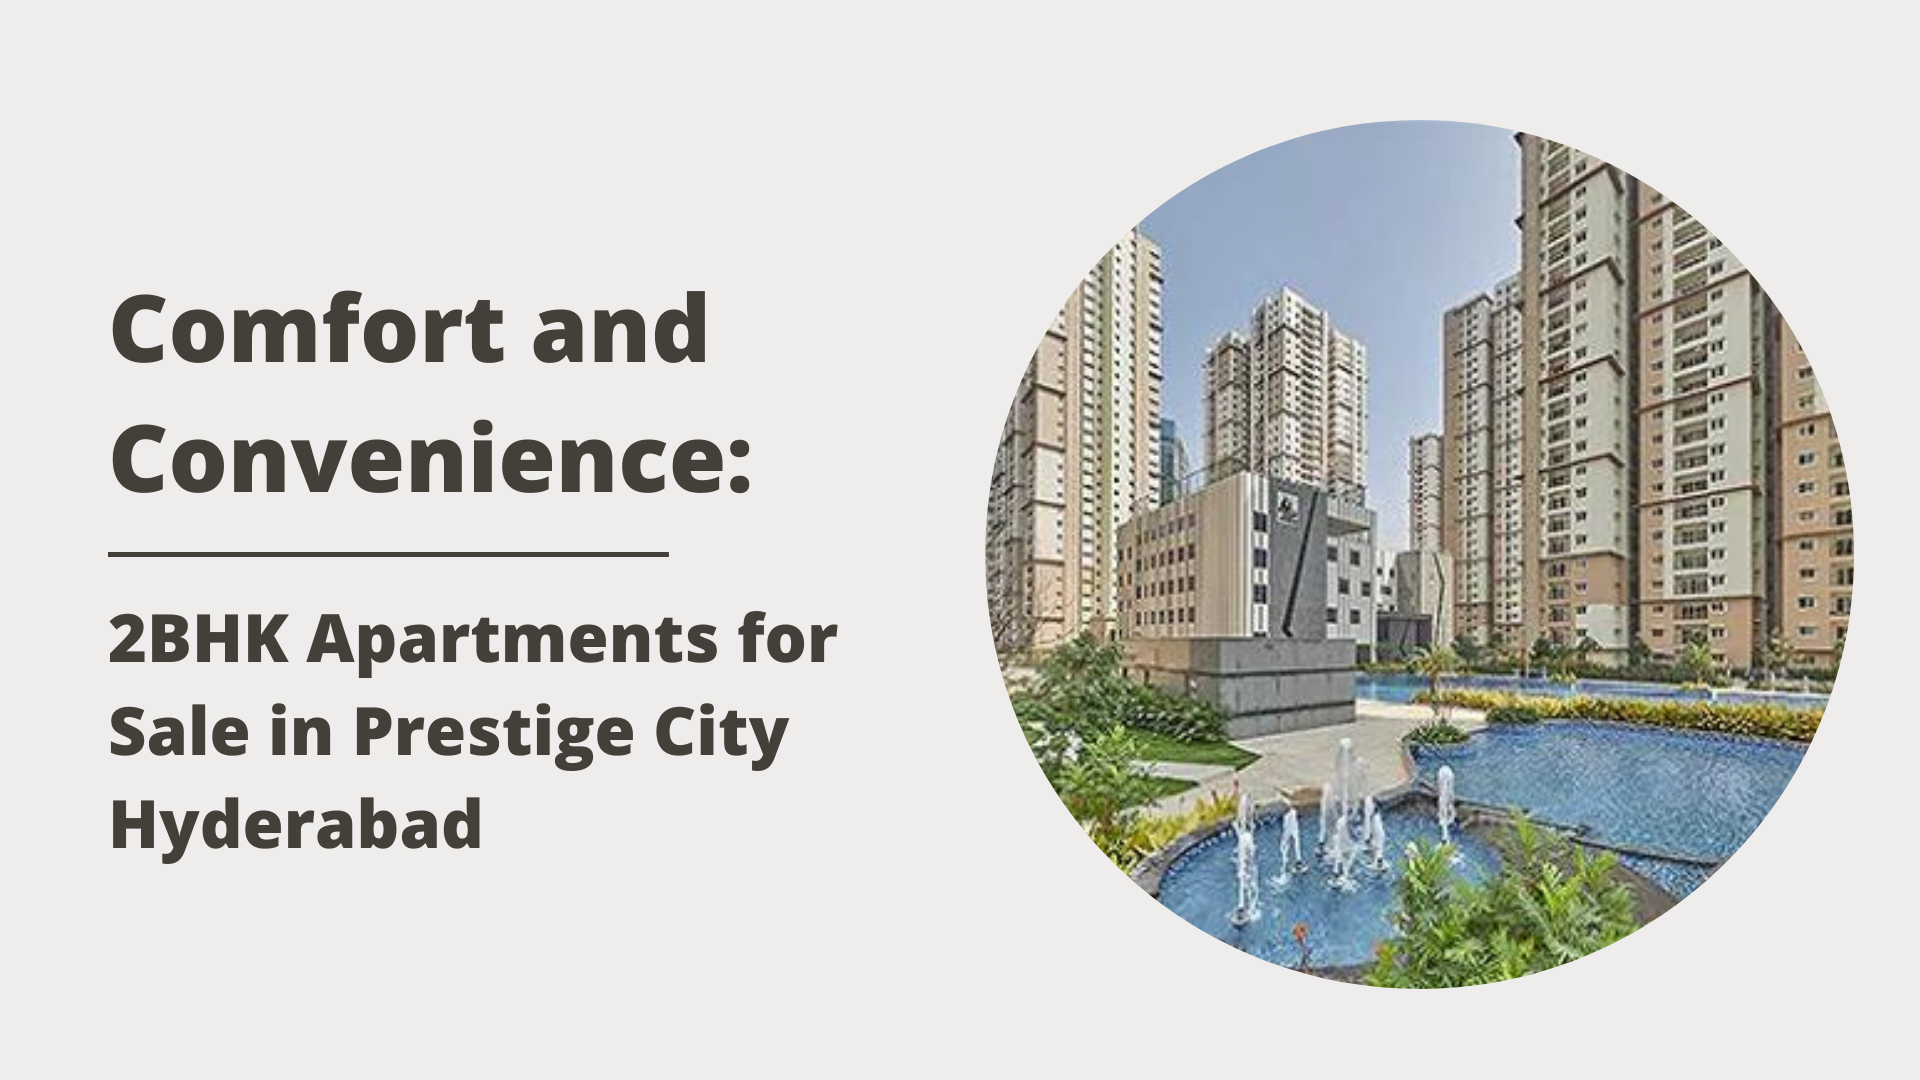 Comfort and Convenience: 2BHK Apartments for Sale in Prestige City Hyderabad